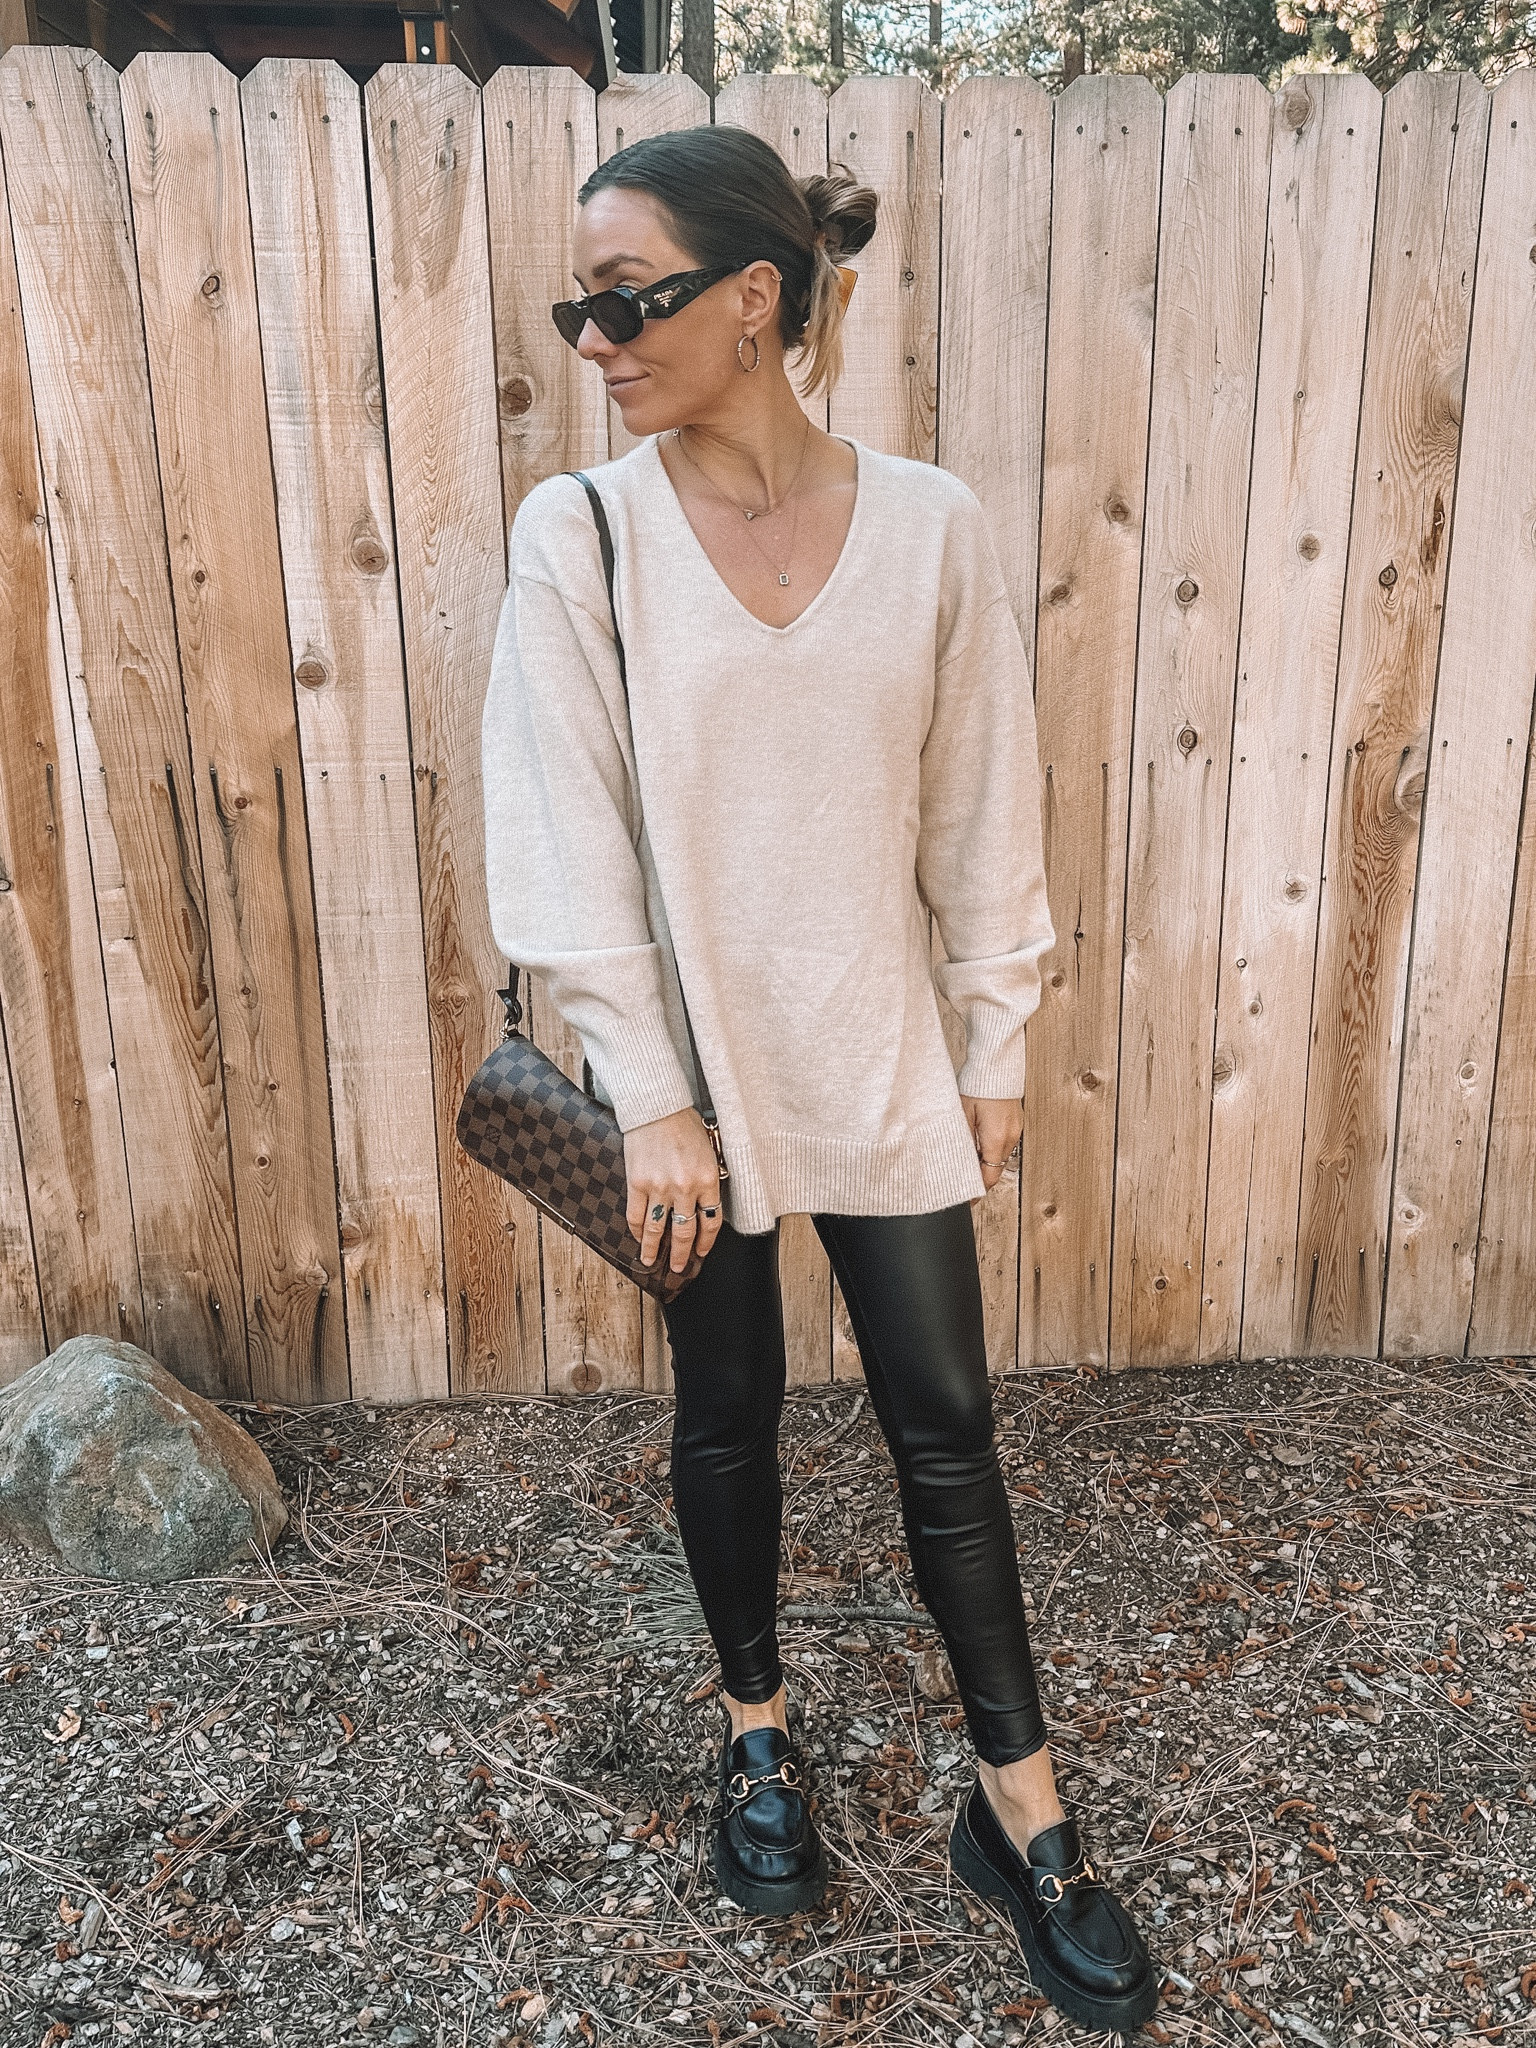 cozy cardigan size small, faux leather leggings, sneakers fit tts   #liketkit @l…